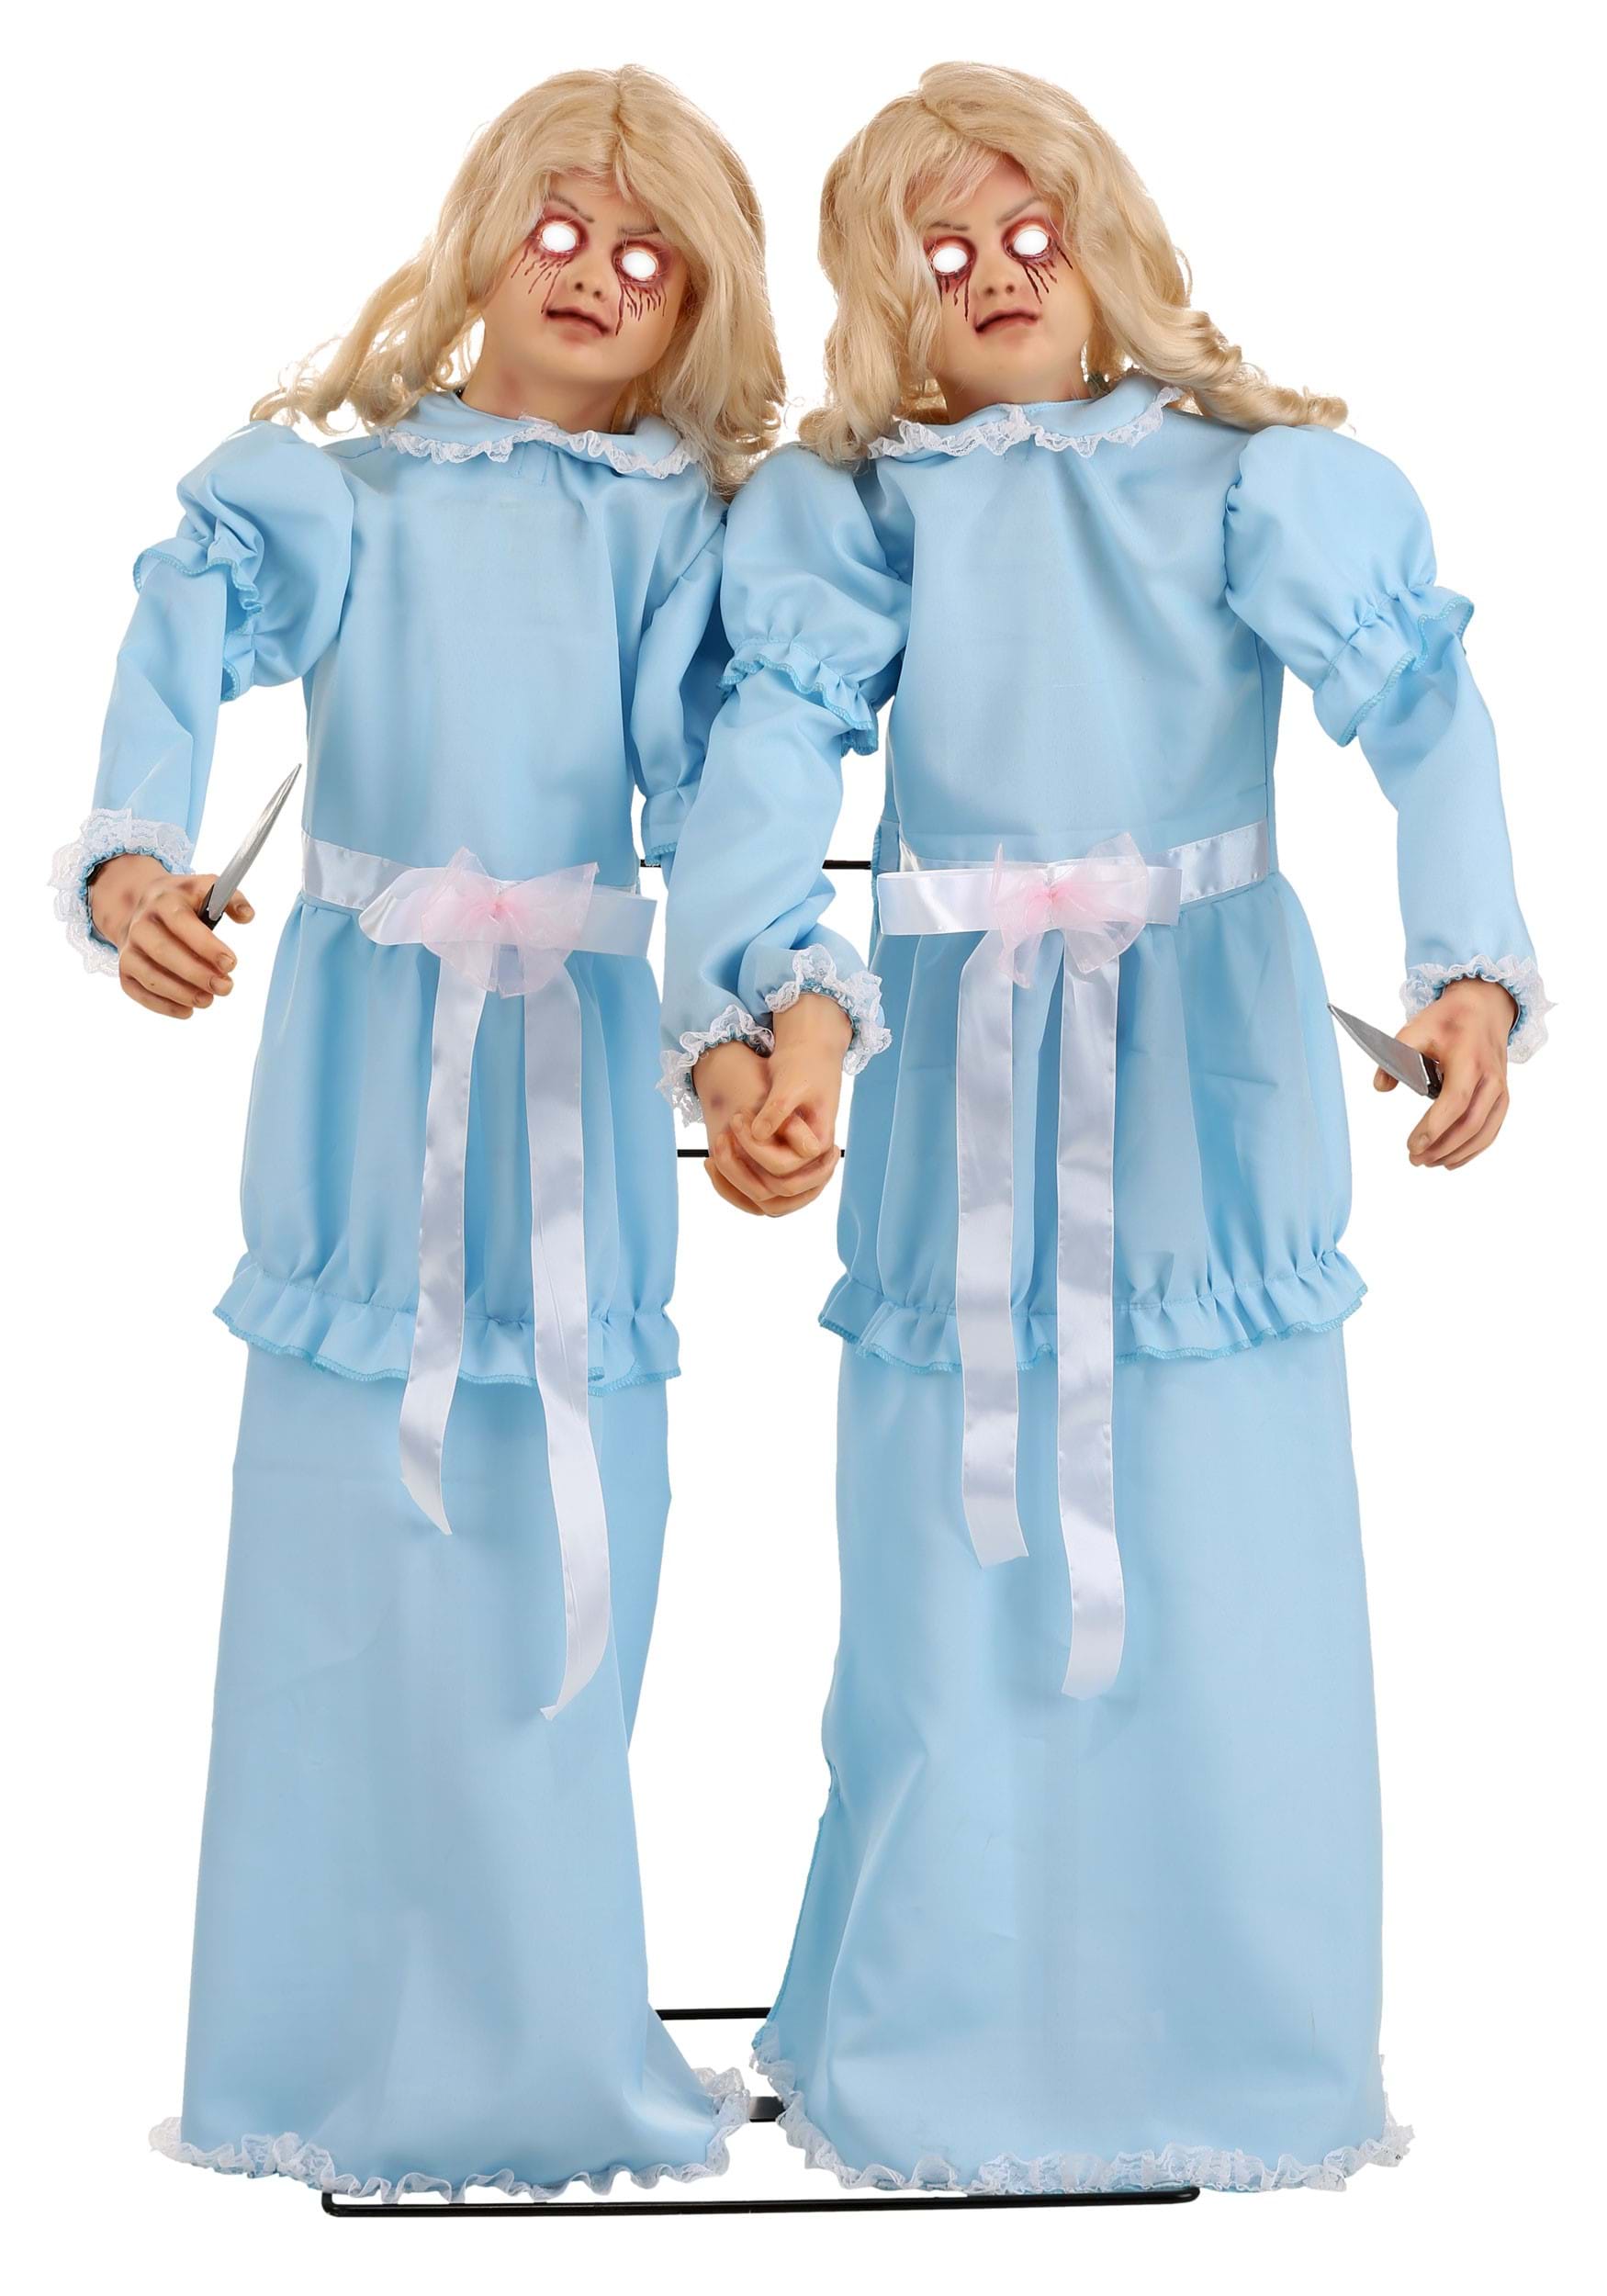 4FT Animated Killer Twin Girls Halloween Prop , Scary Decorations